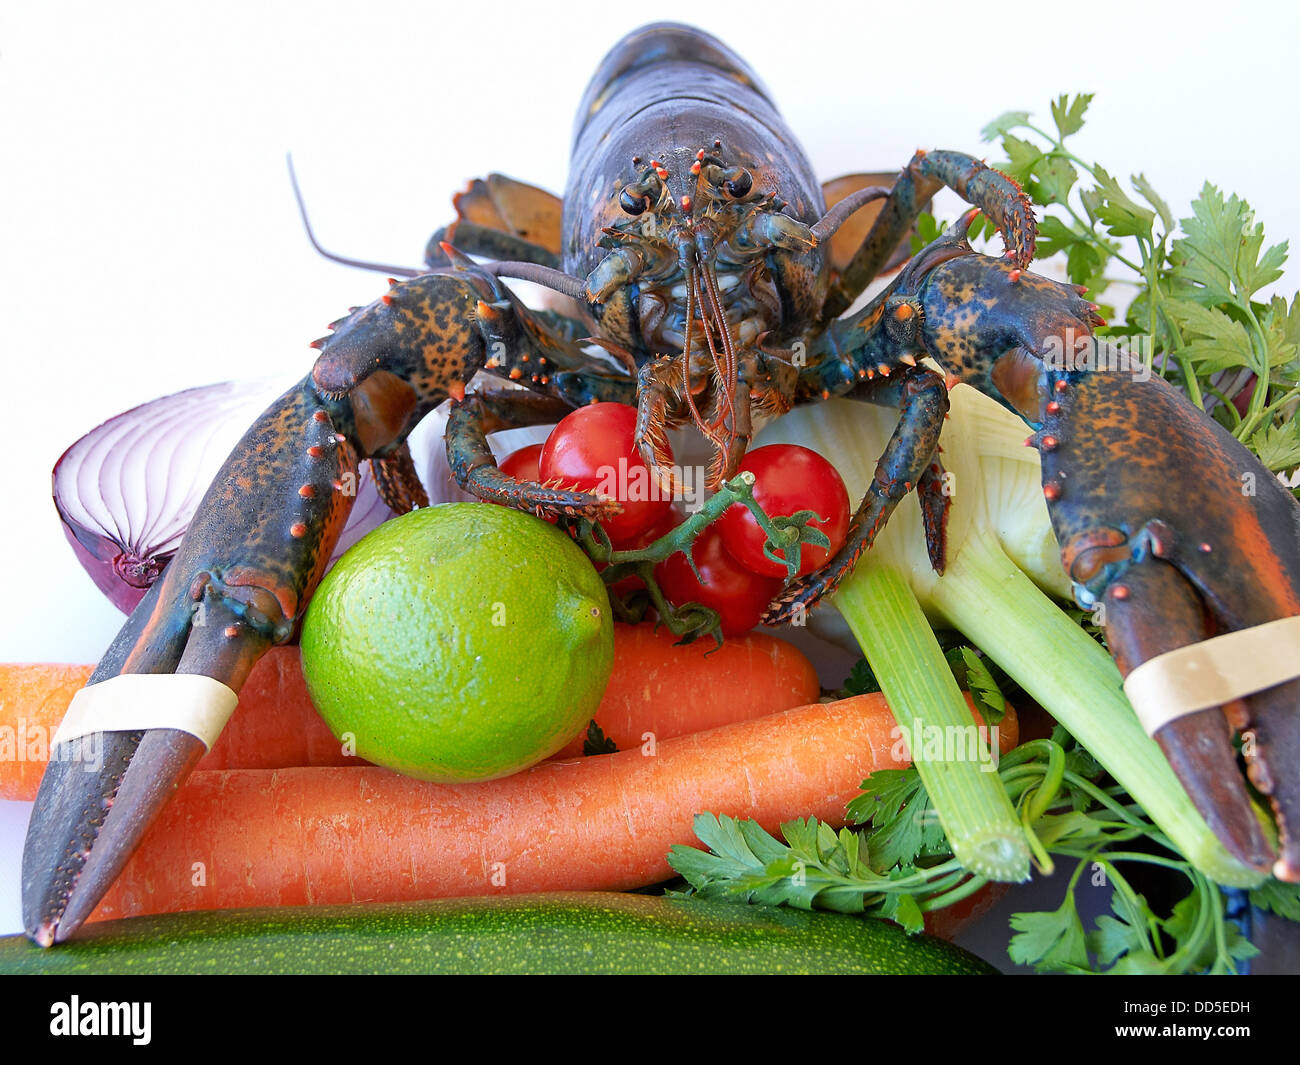 -Lobster and Veggies- Stock Photo